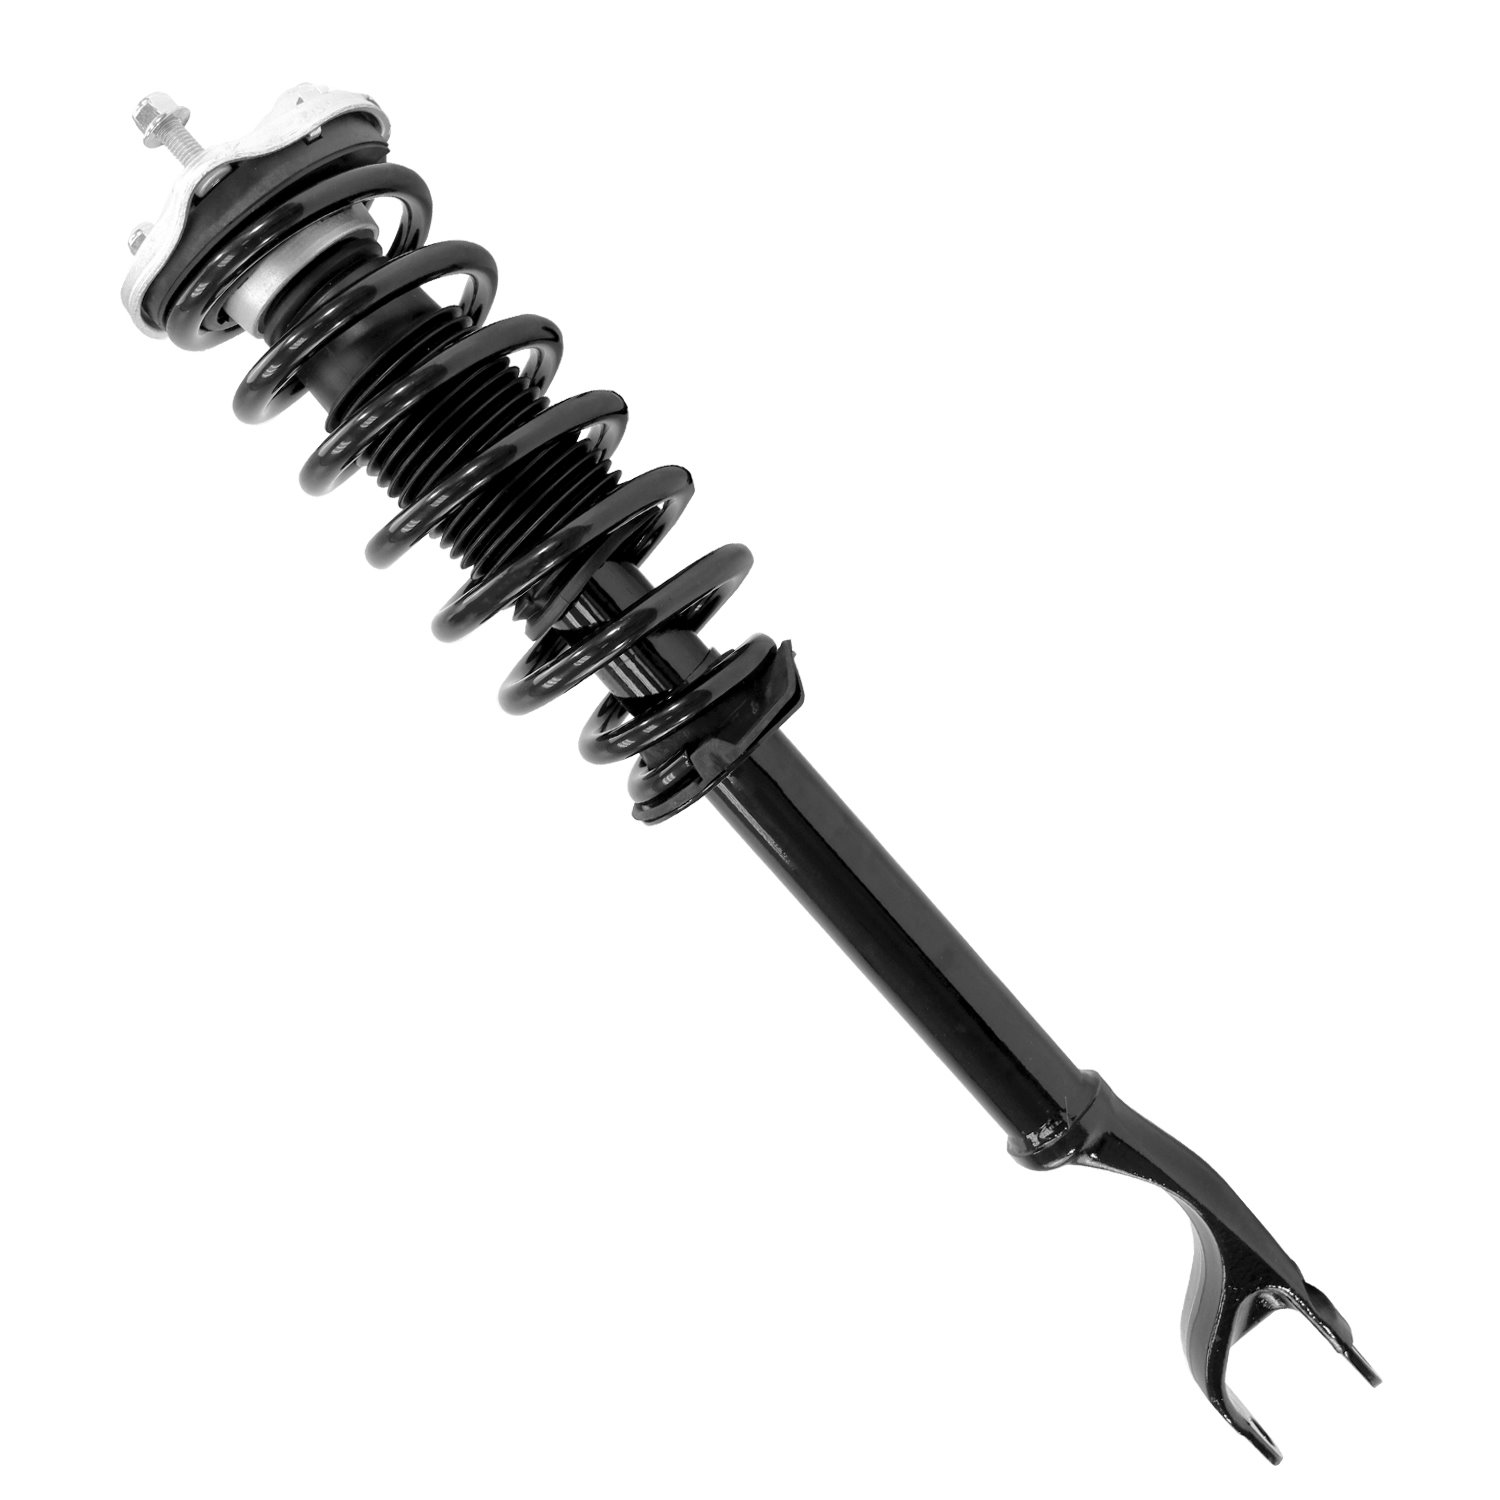 13472 Front Suspension Strut & Coil Spring Assemby Fits Select Mercedes-Benz